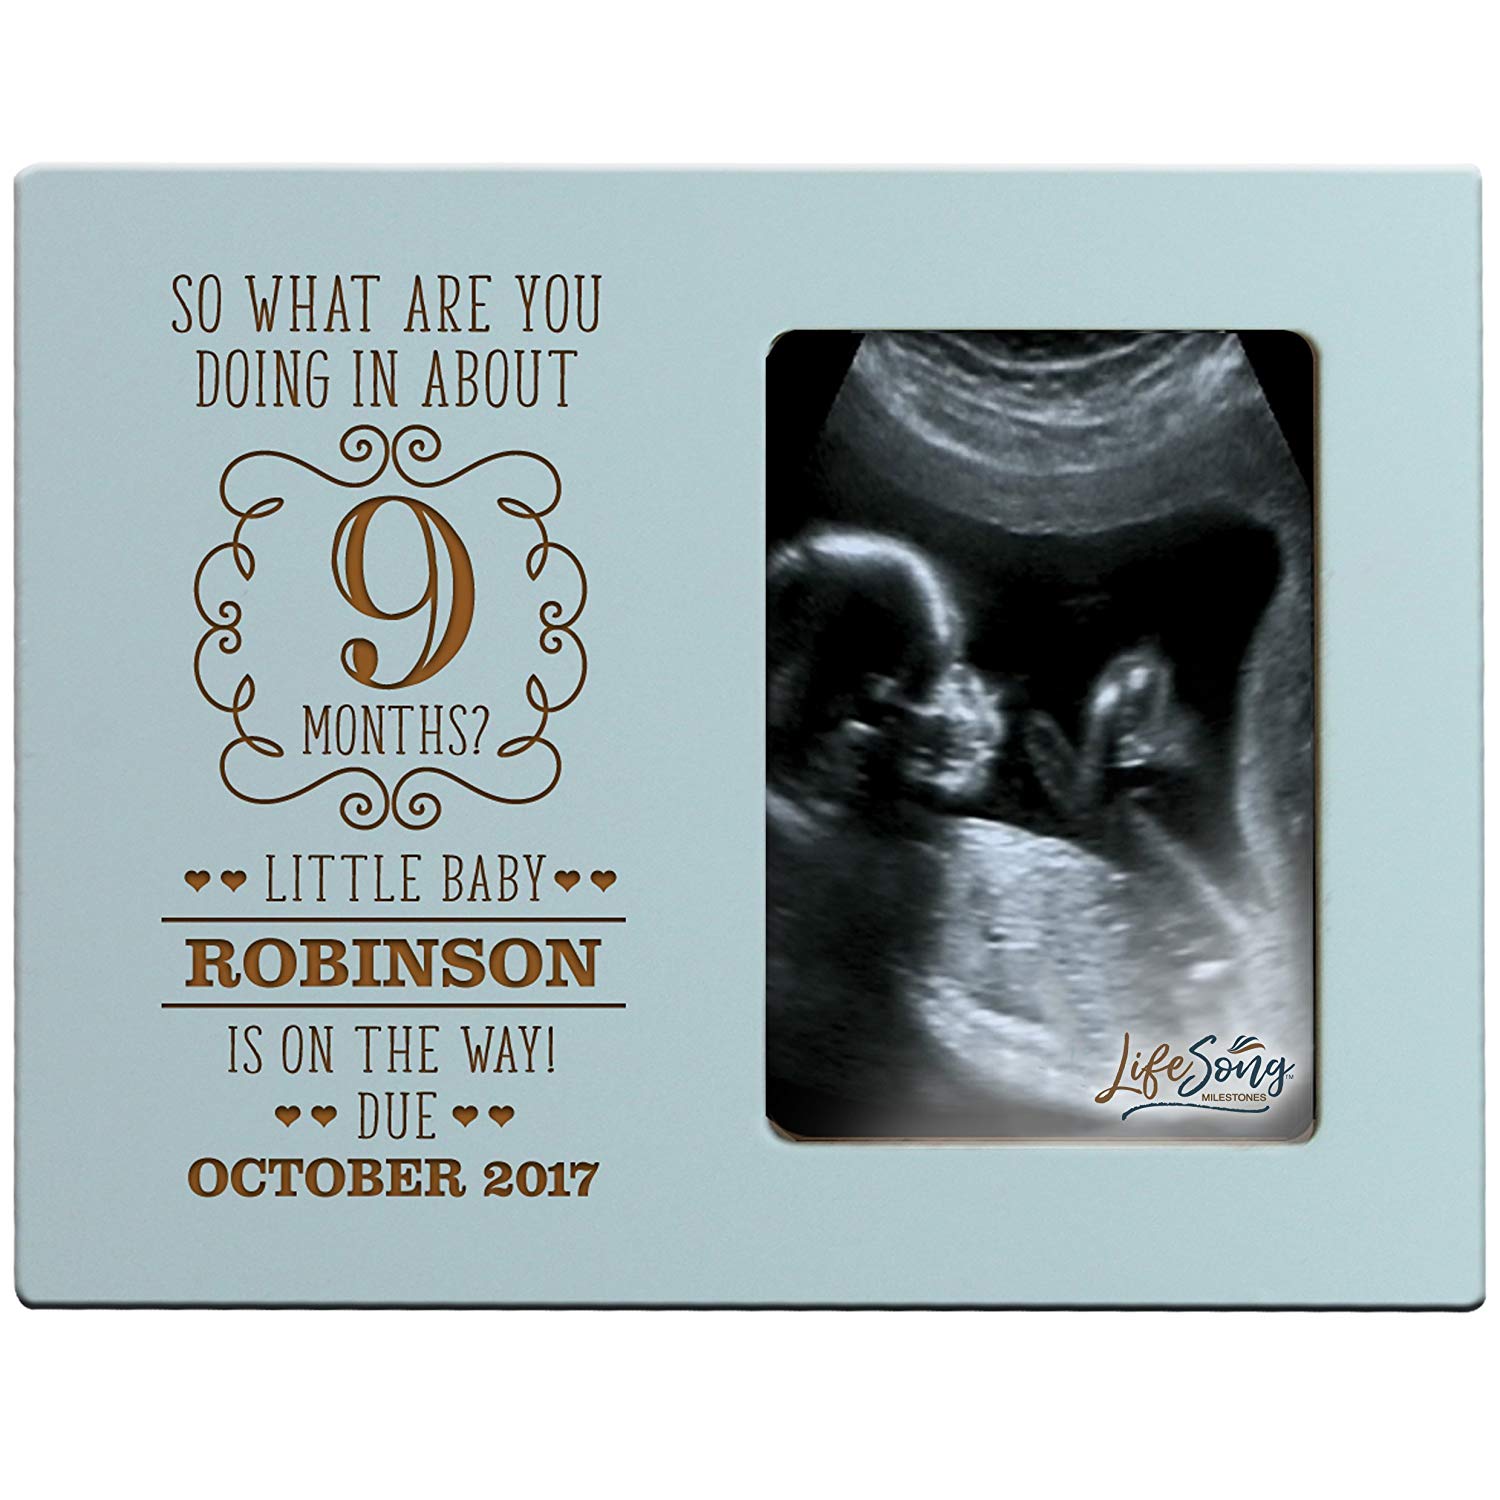 Personalized New Baby Sonogram Photo Frames - About 9 Months? - LifeSong Milestones